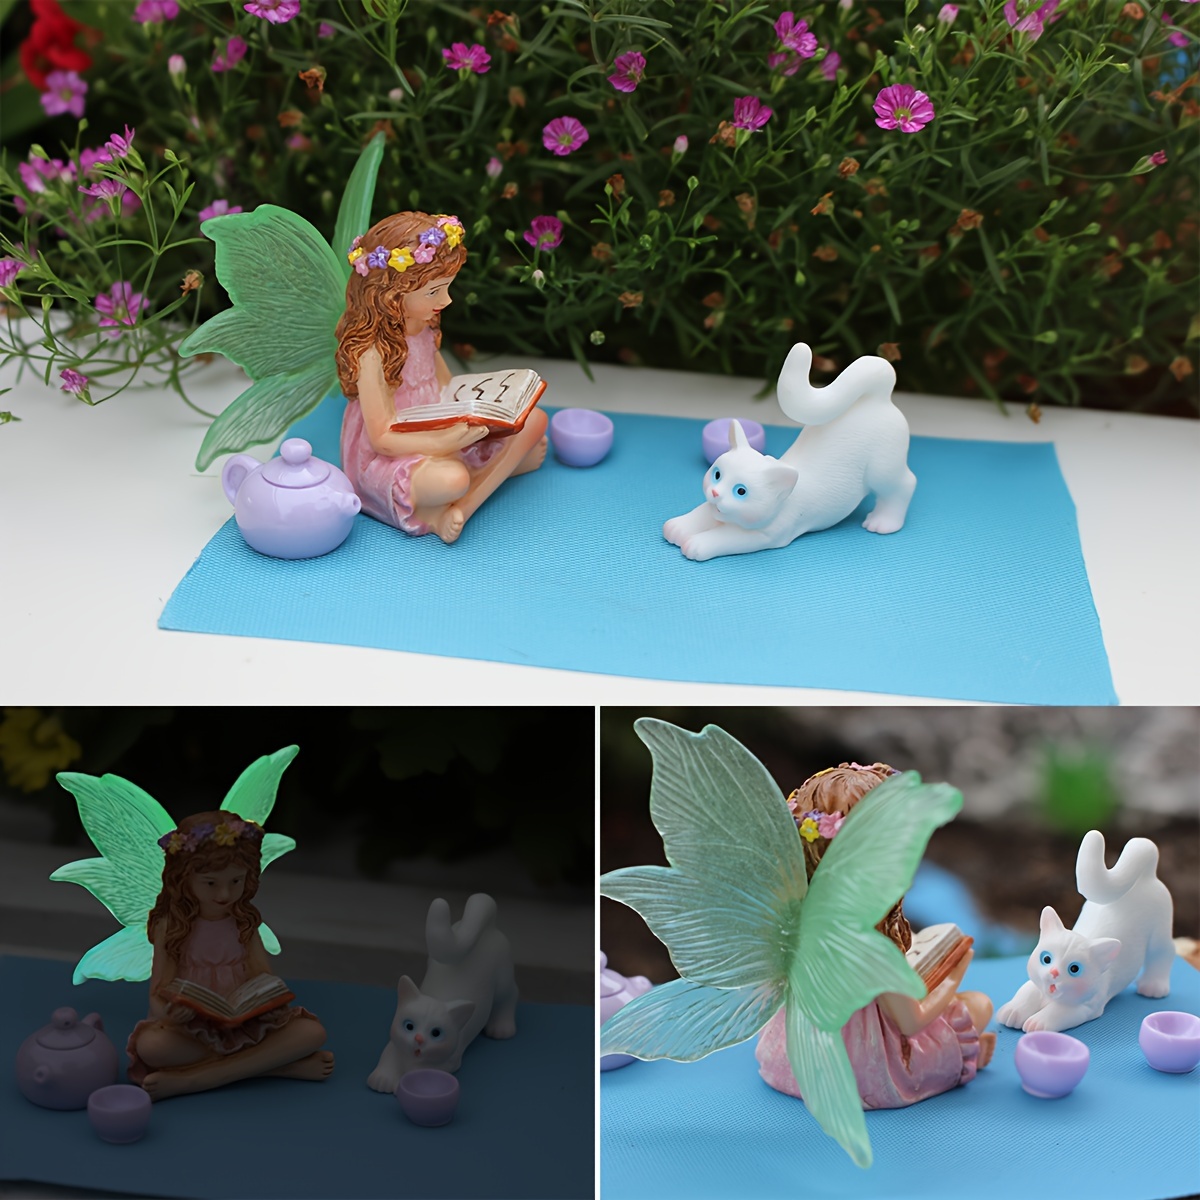 

1set Fairy Reading And Drinking Tea Statue Cat Statue Resin Crafts Home Furnishings, Fairy Garden Bonsai Decorations, Office Desk Mini-ornaments, Gifts For Family And Friends